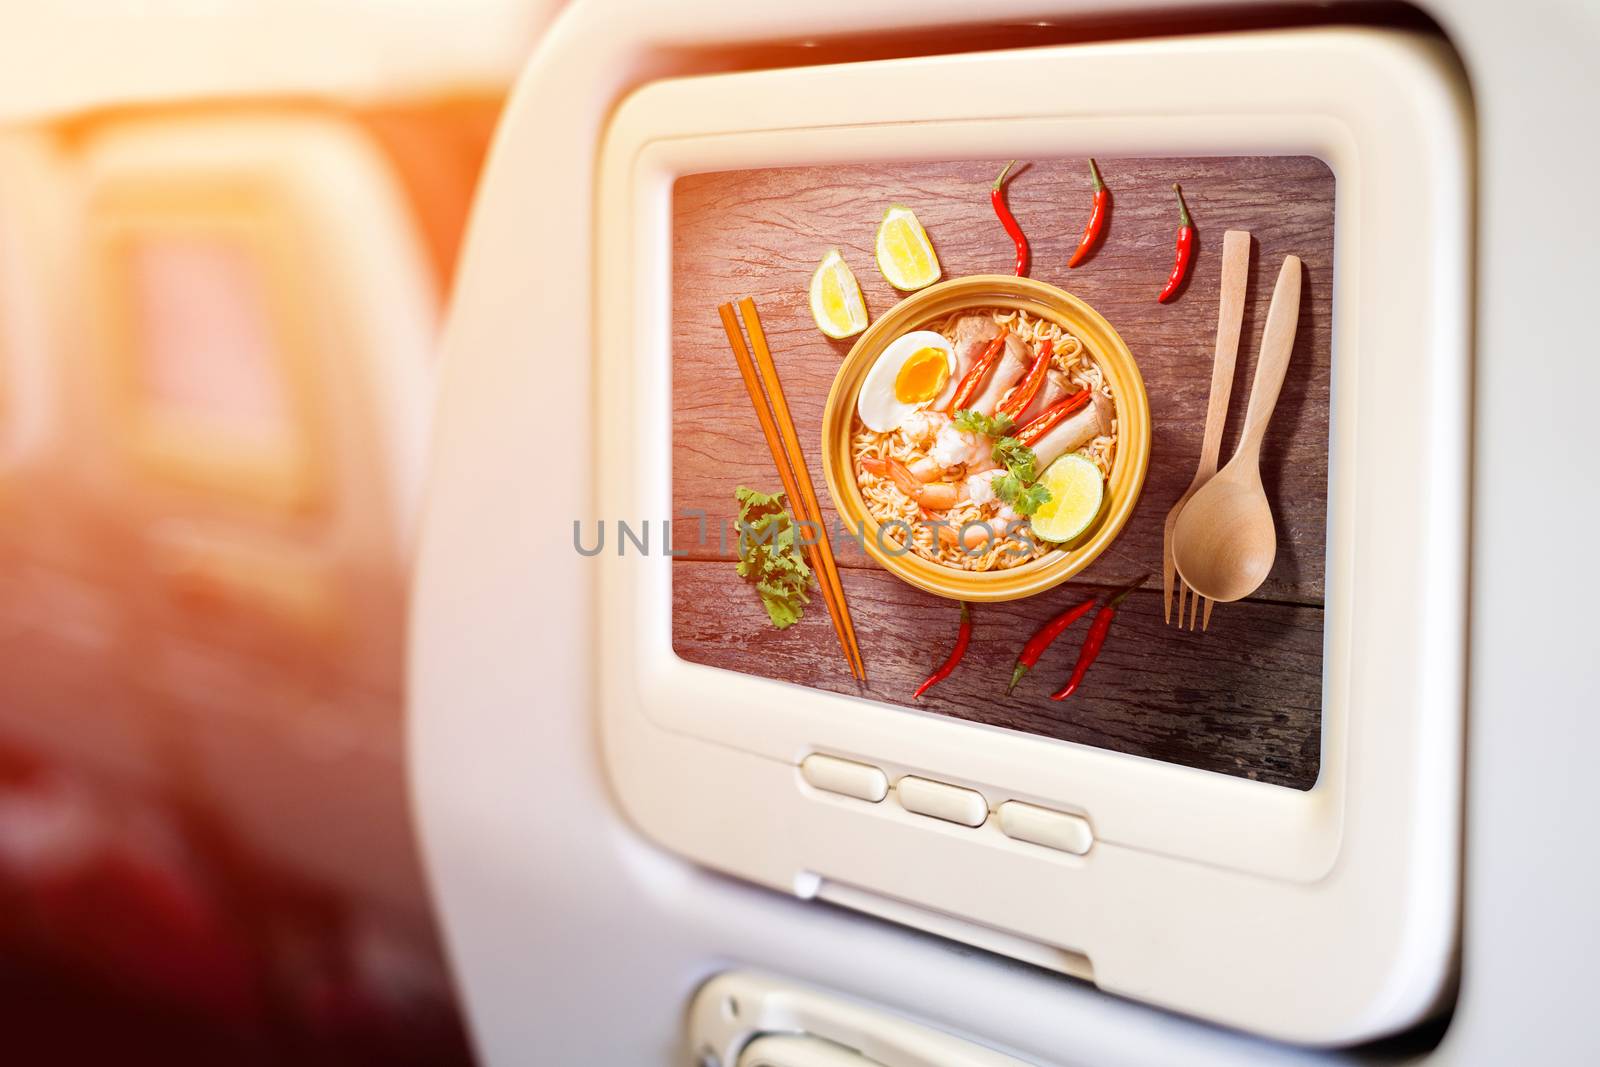 Aircraft monitor in front of passenger seat showing Thai food style noodle, Ma Ma tom yum kung 